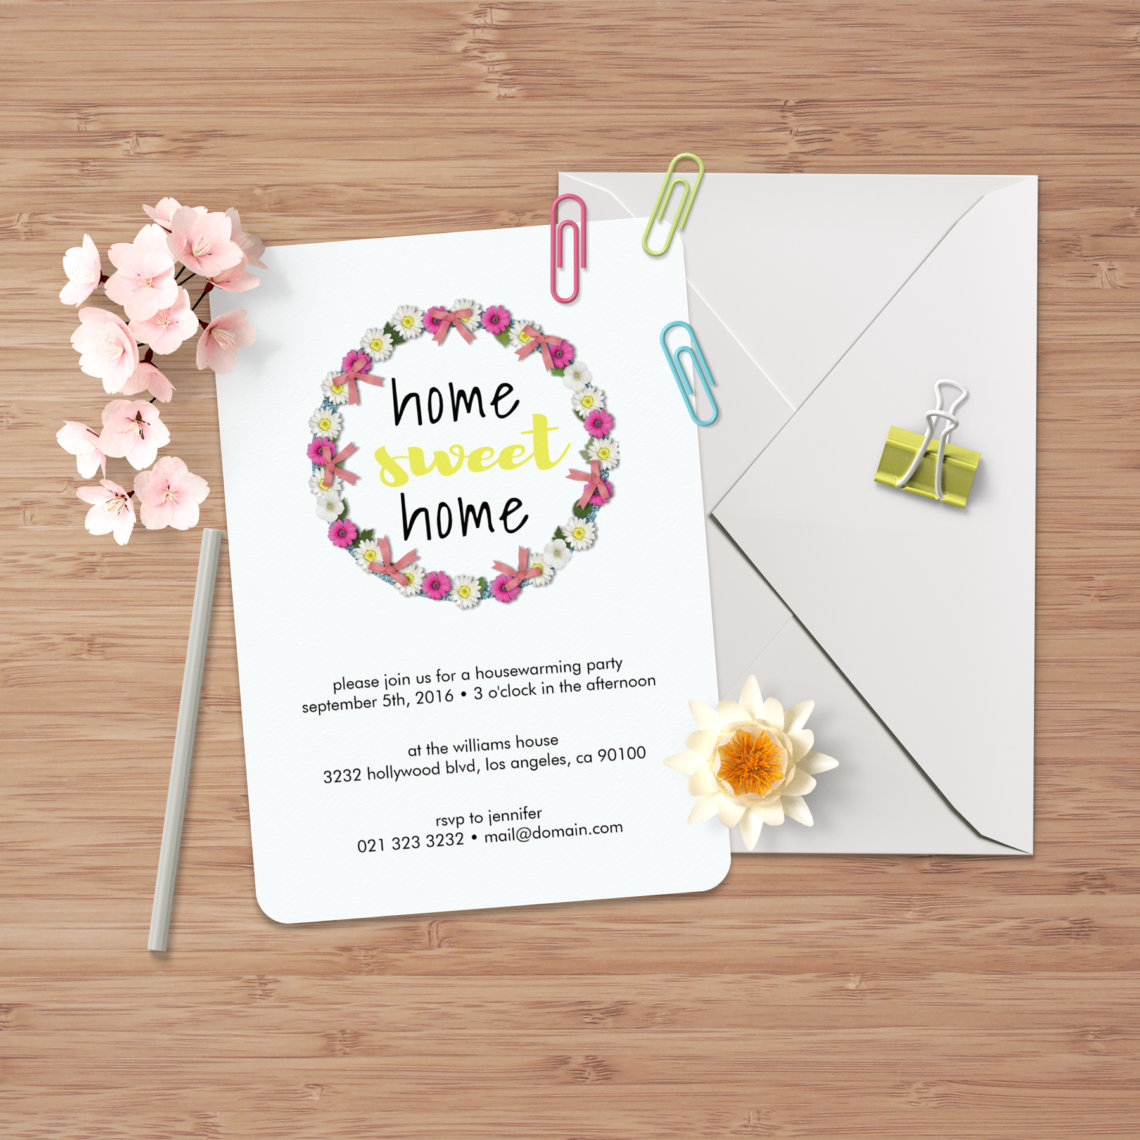 Housewarming Party Invitation – Home Sweet Home